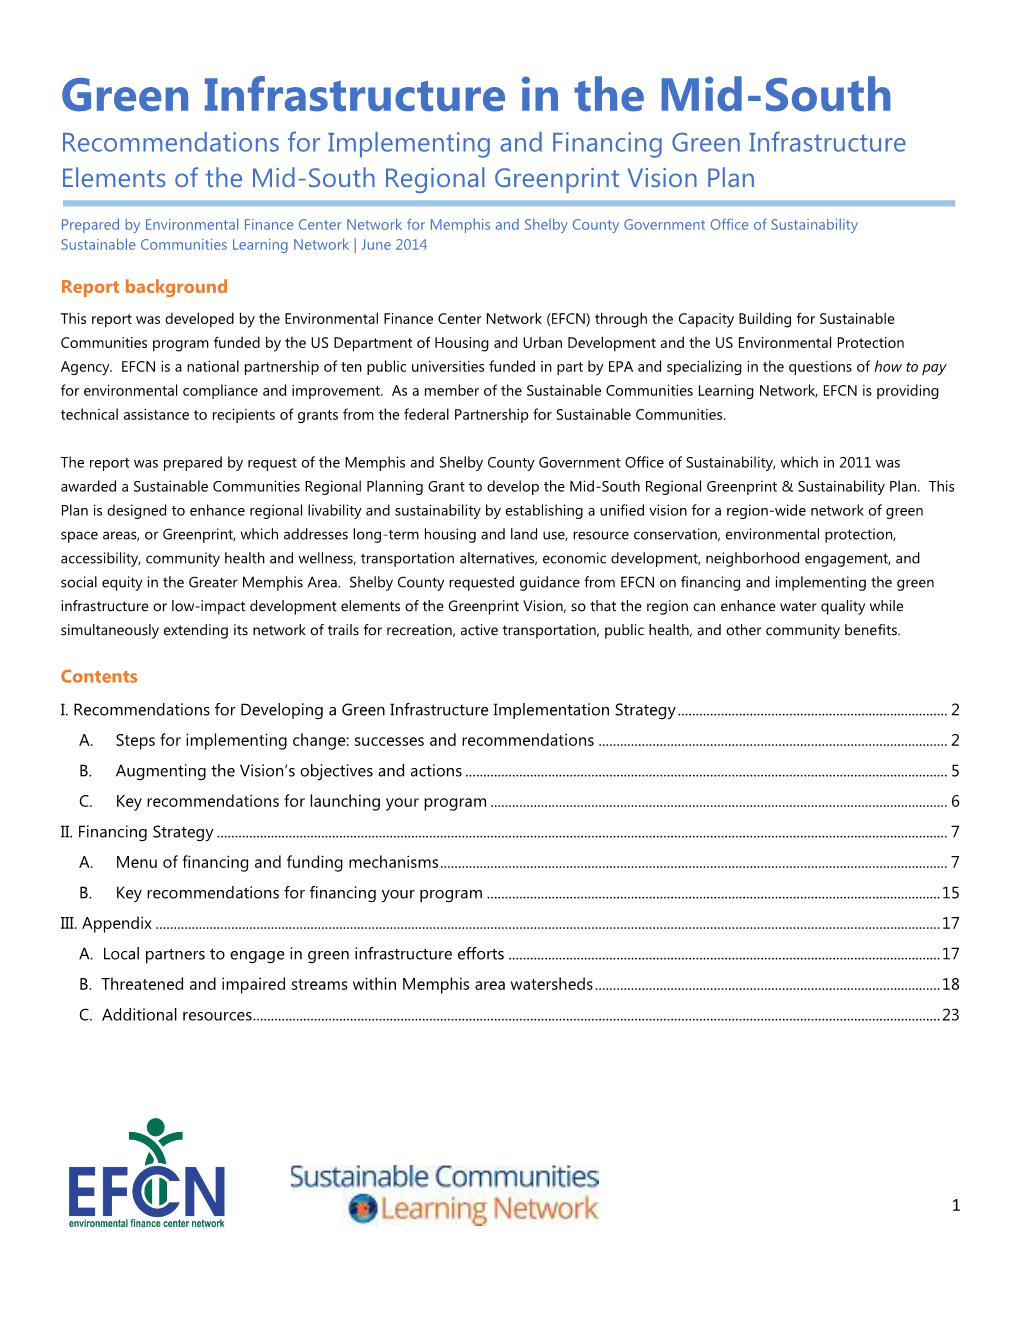 Green Infrastructure in the Mid-South Recommendations for Implementing and Financing Green Infrastructure Elements of the Mid-South Regional Greenprint Vision Plan